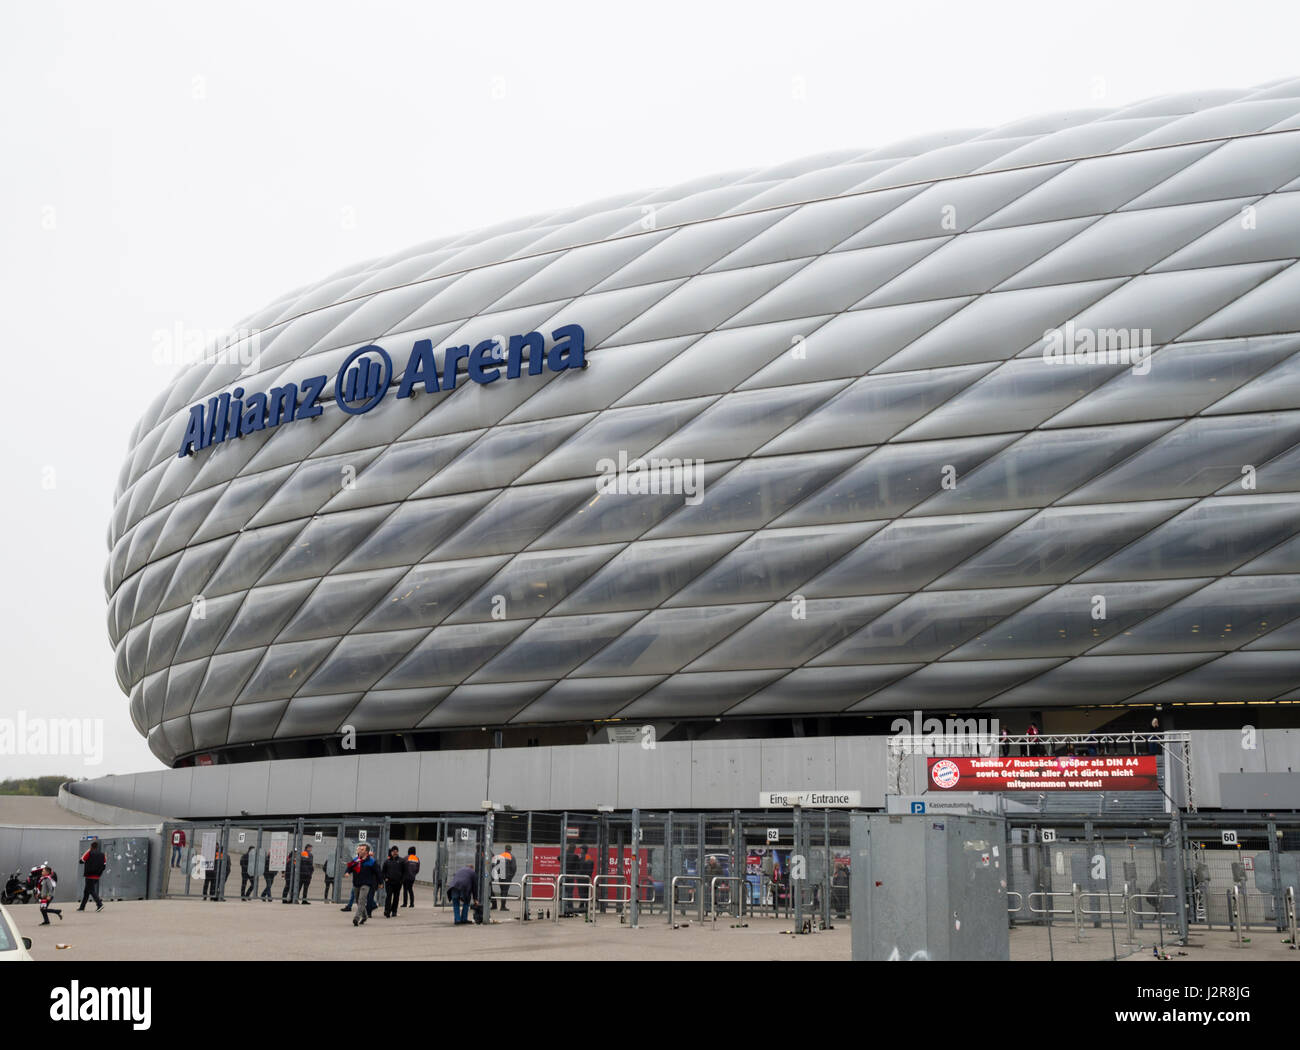 Munich, Germany - 22 April 2017: Football fans are entering the Allianz Arena football stadium in Munich, Germany. With 75'000 seats, Allianz Arena is Stock Photo